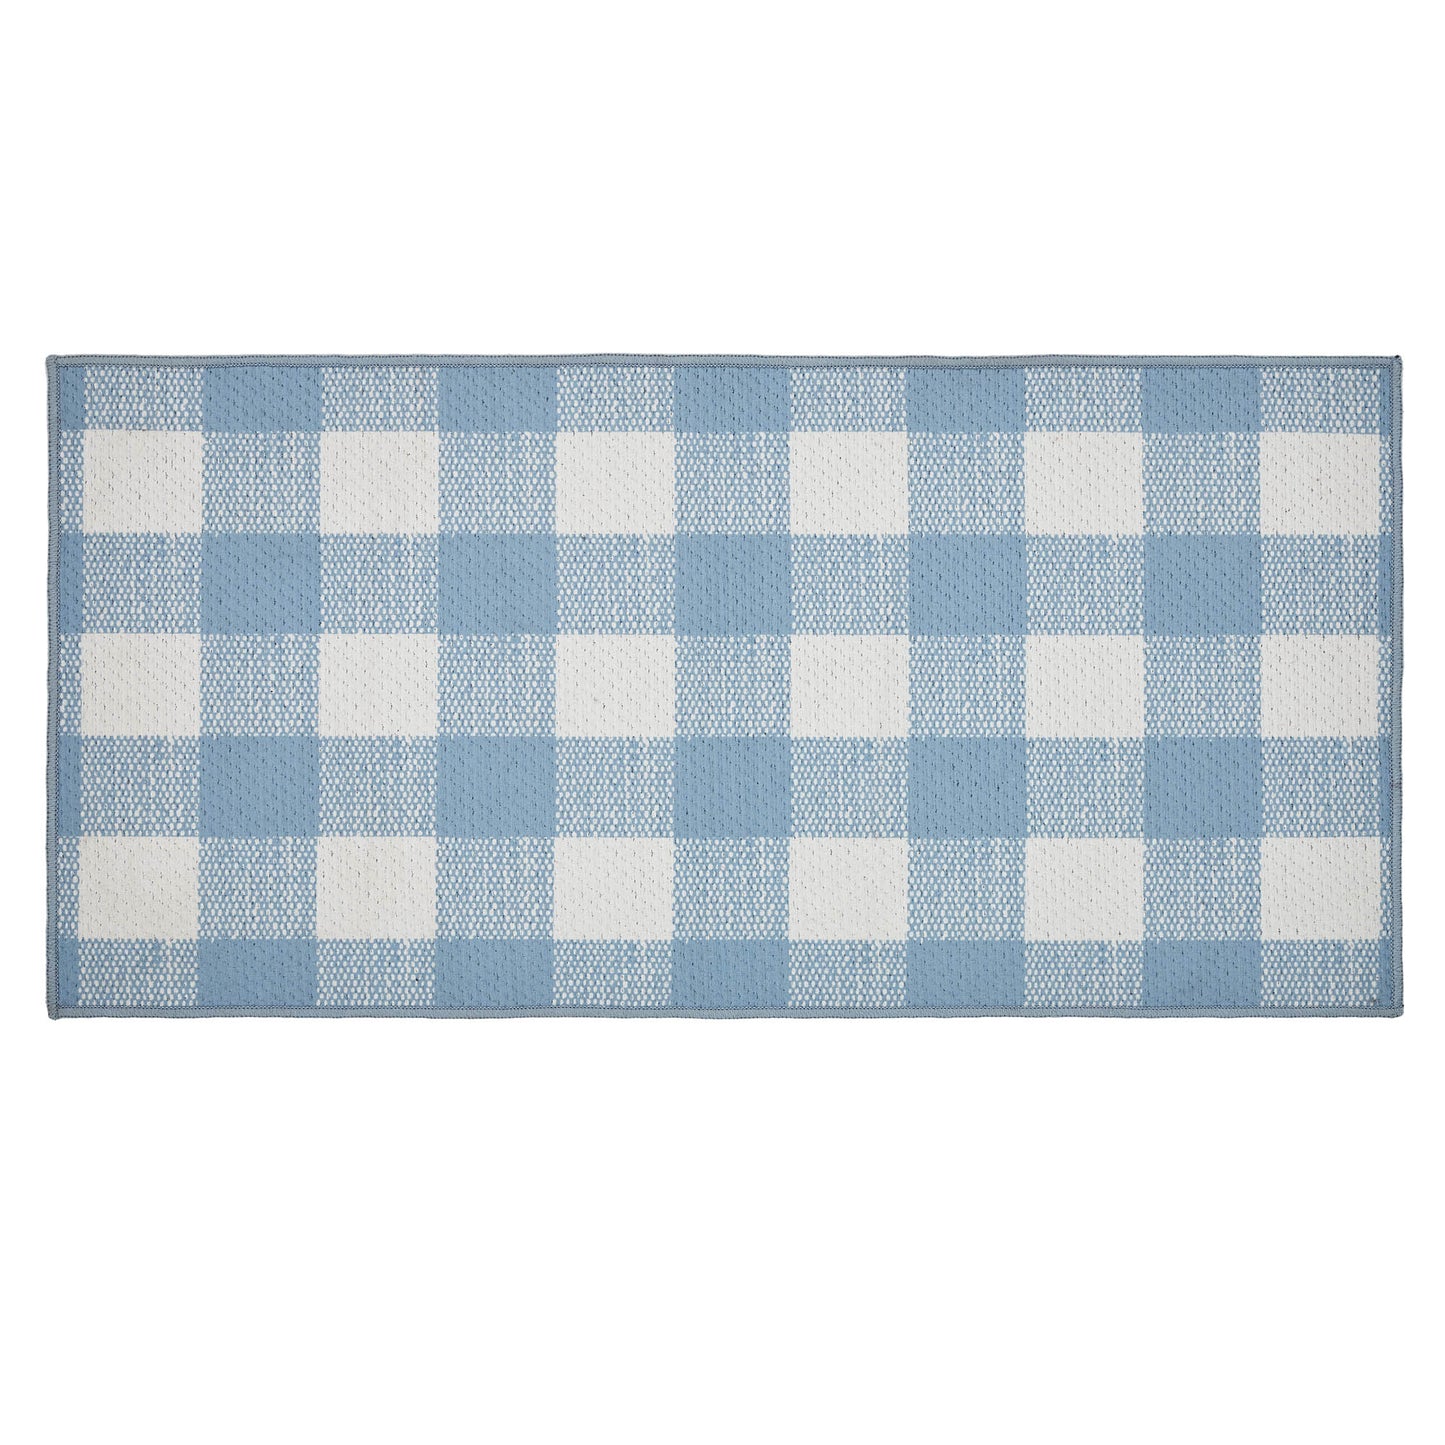 VHC Brands Annie Buffalo Check Blue Indoor/Outdoor Rug Rect 17x36, Polyester Area Rug, Accent Rug, Floor Decor, Annie Buffalo Check Collection, Rectangle 17x36, Dusk Blue